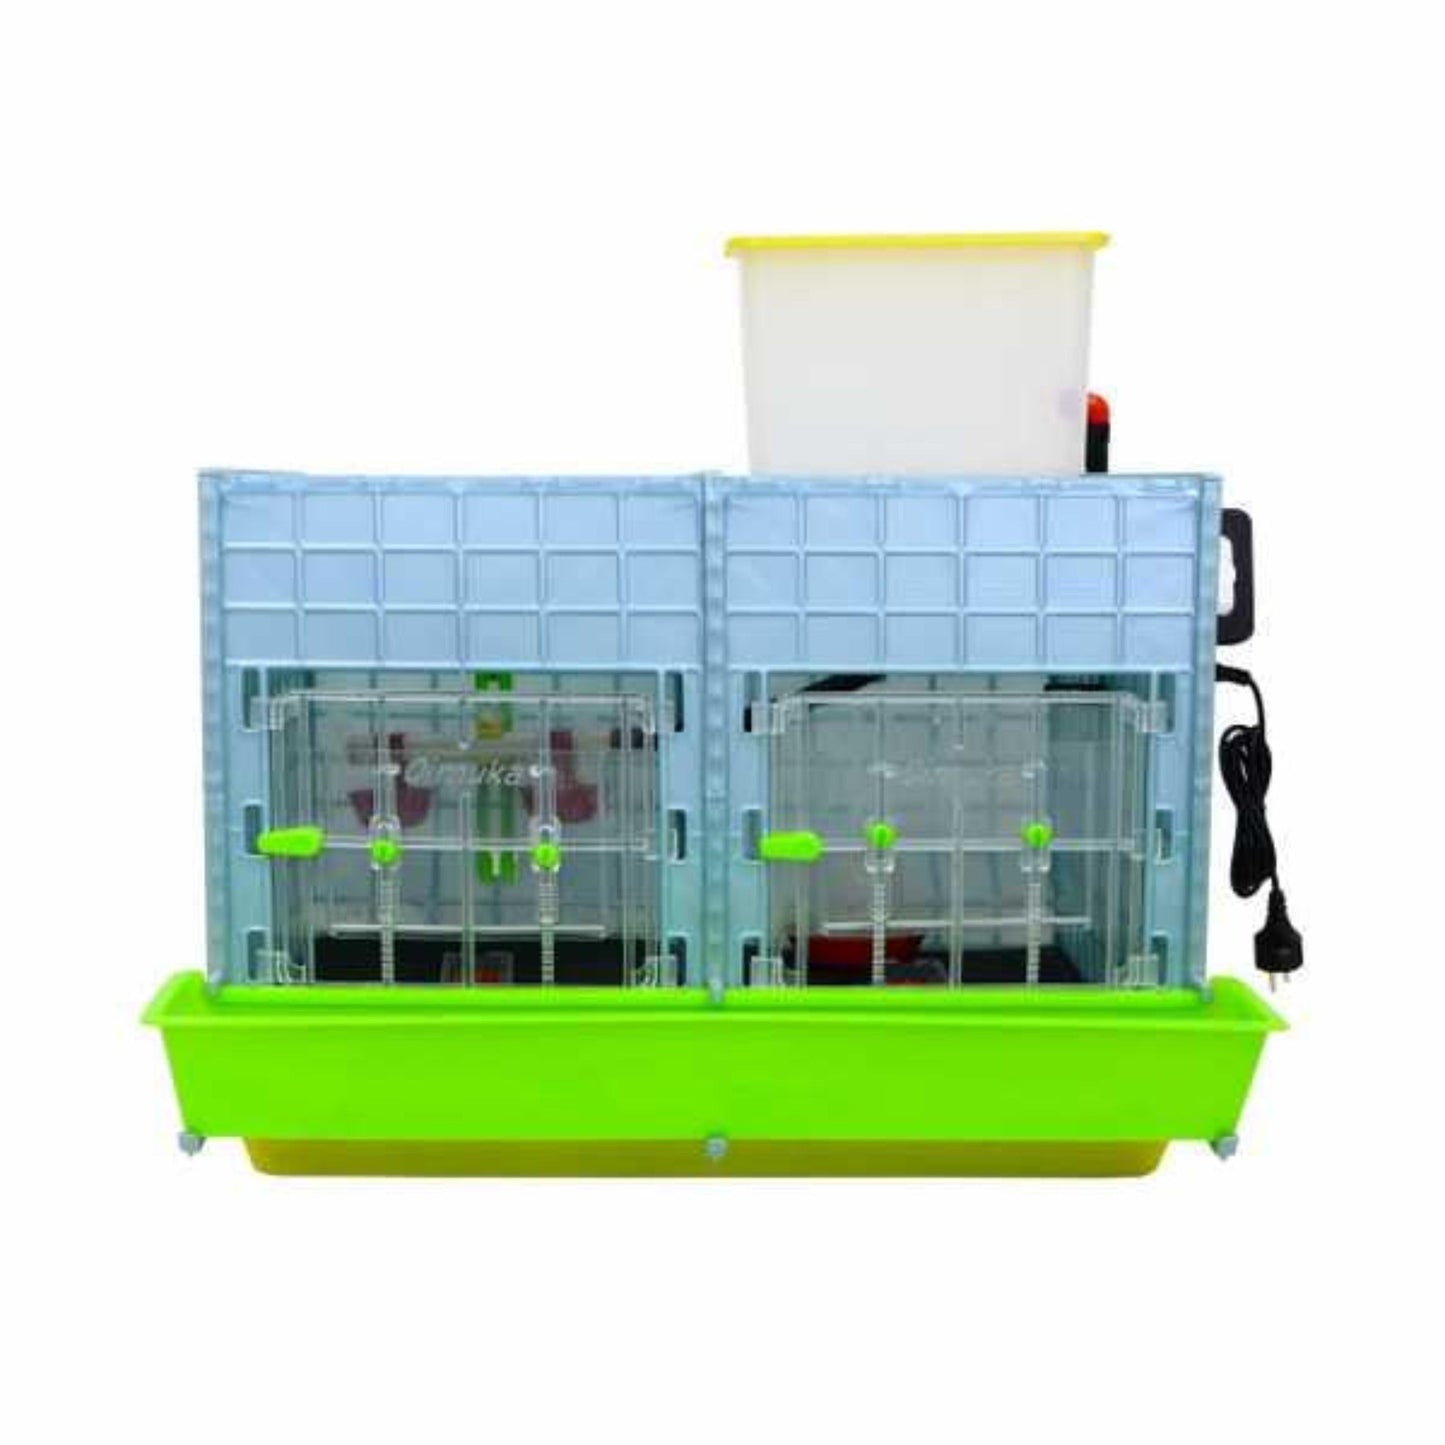 CHICK BROODER MIDI: 2 SECTIONS, HEIGHT 15-INCHES